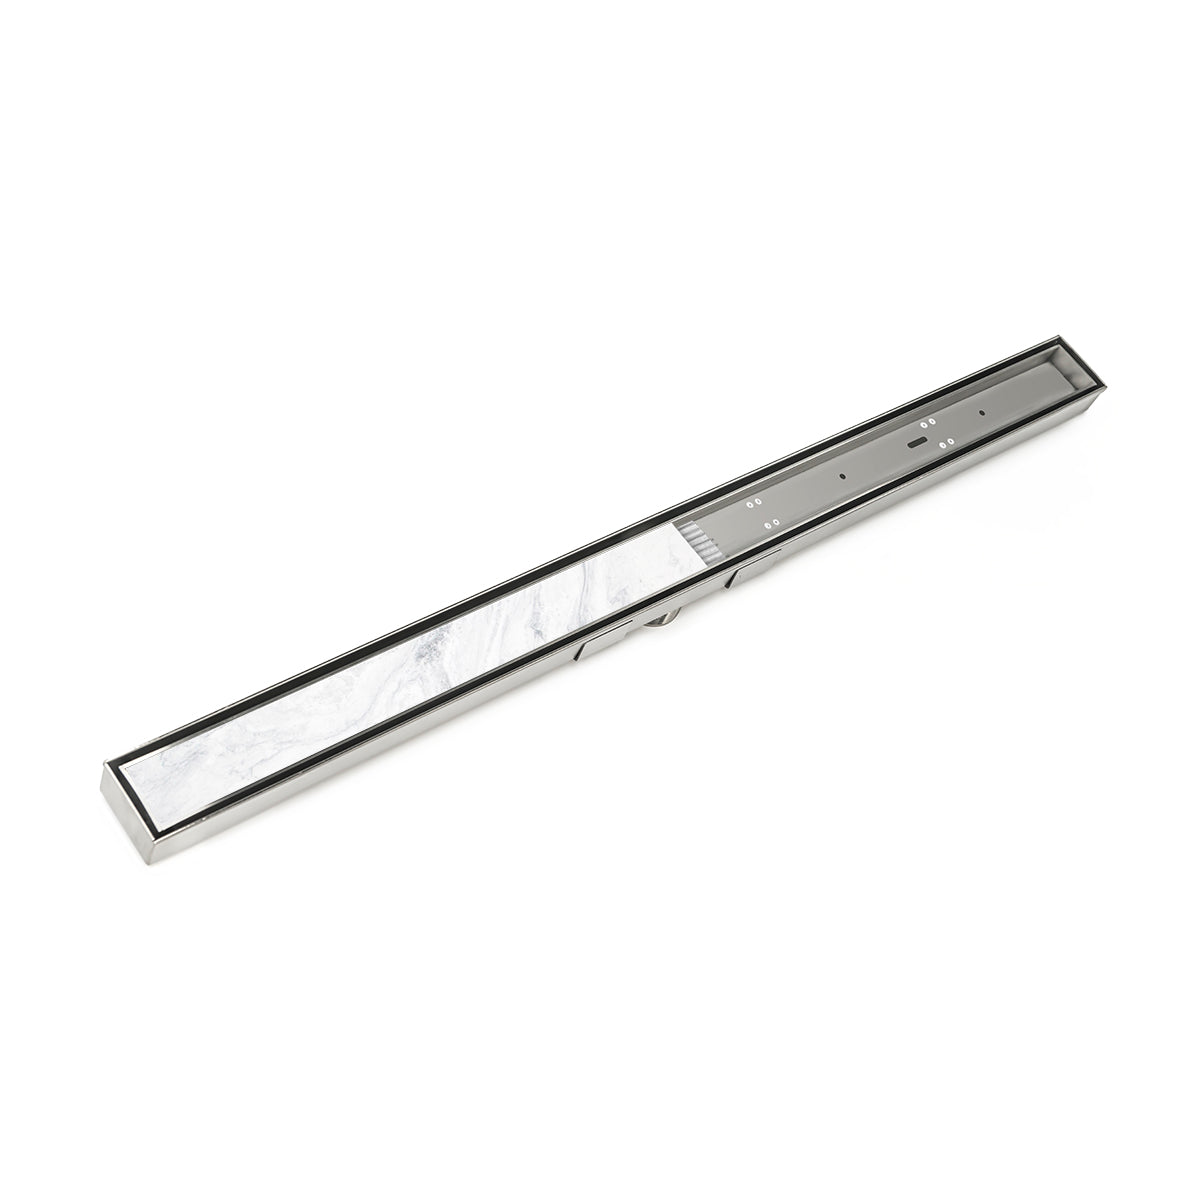 Infinity Drain 36" S-Stainless Steel Series High Flow Site Sizable Linear Drain Kit with Low Profile Tile Insert Frame with Cast Iron Drain Body, 3" No Hub Outlet